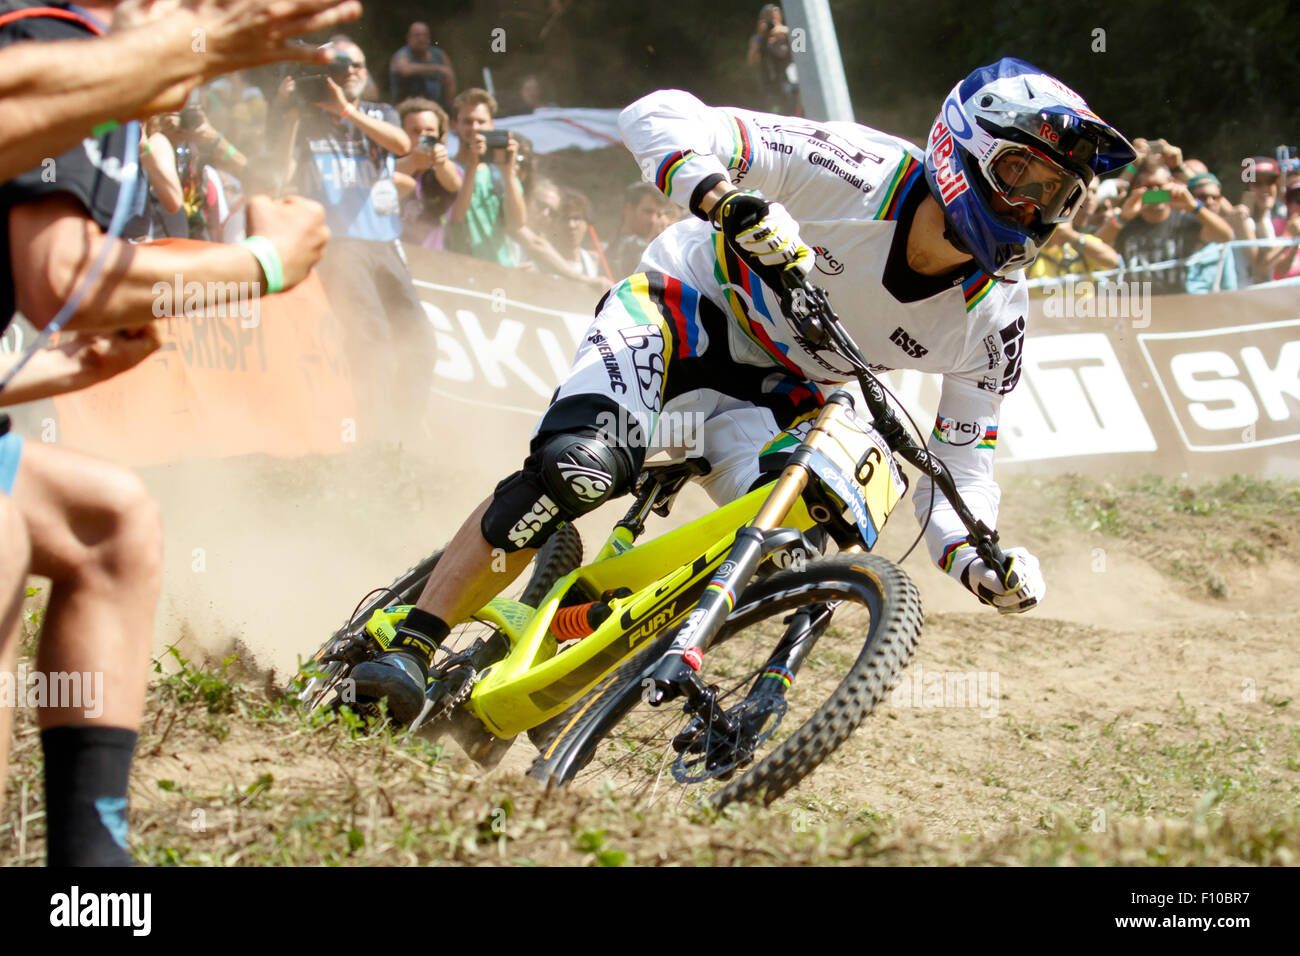 Val Di Sole, Italy - 22 August 2015: Gt Factory Racing Team rider Atherton Gee, in action during the mens elite Downhill final Stock Photo